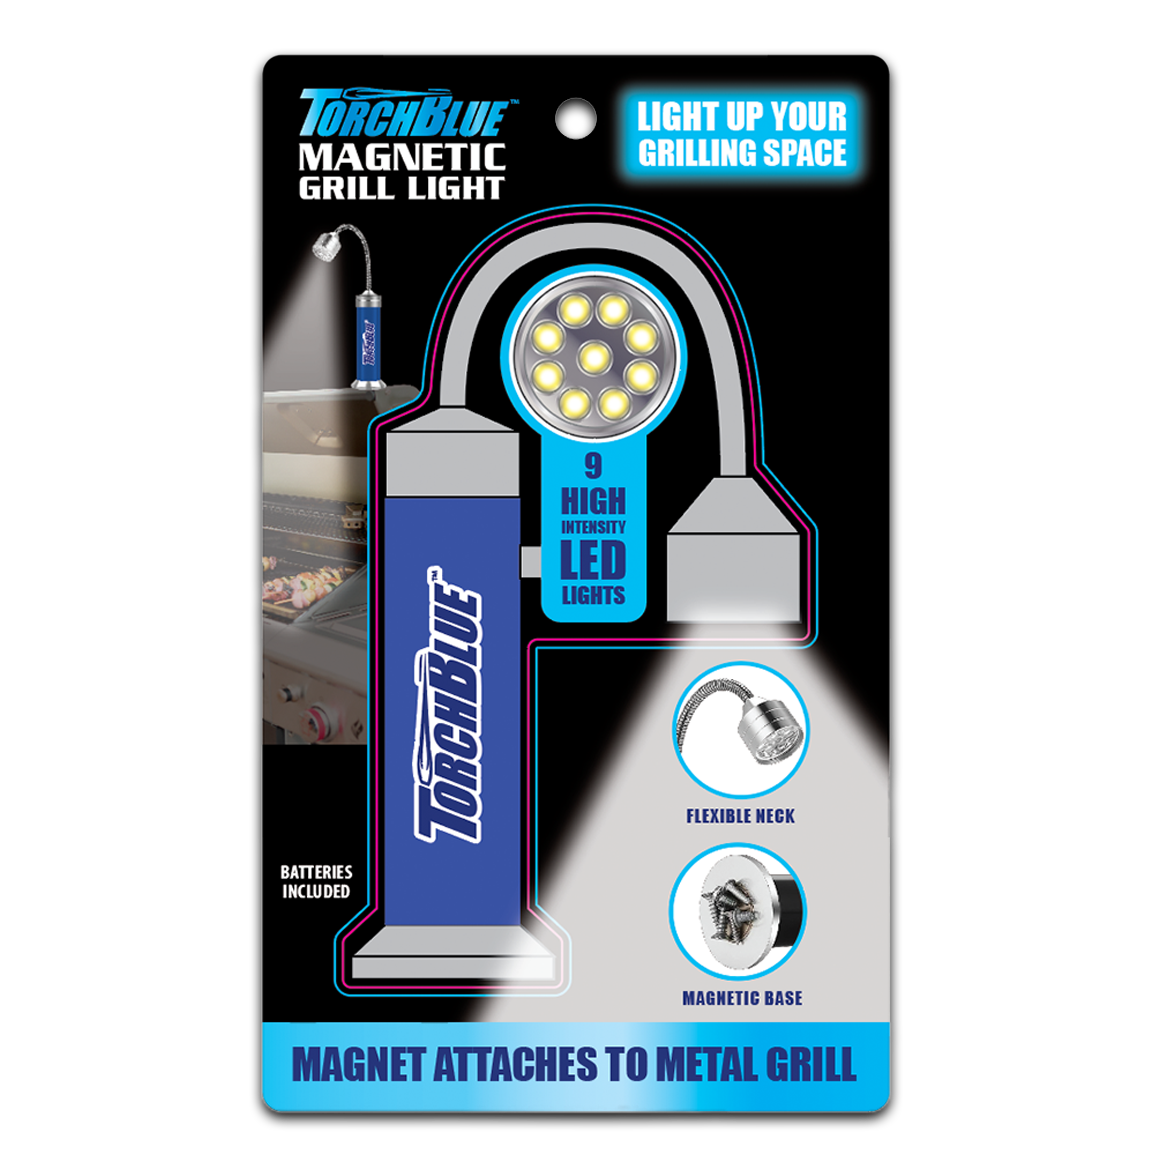 ITEM NUMBER 023848L TORCH BLUE MAGNETIC GRILL FLASHLIGHT - STORE SUPLUS 6 PIECES PER PACK